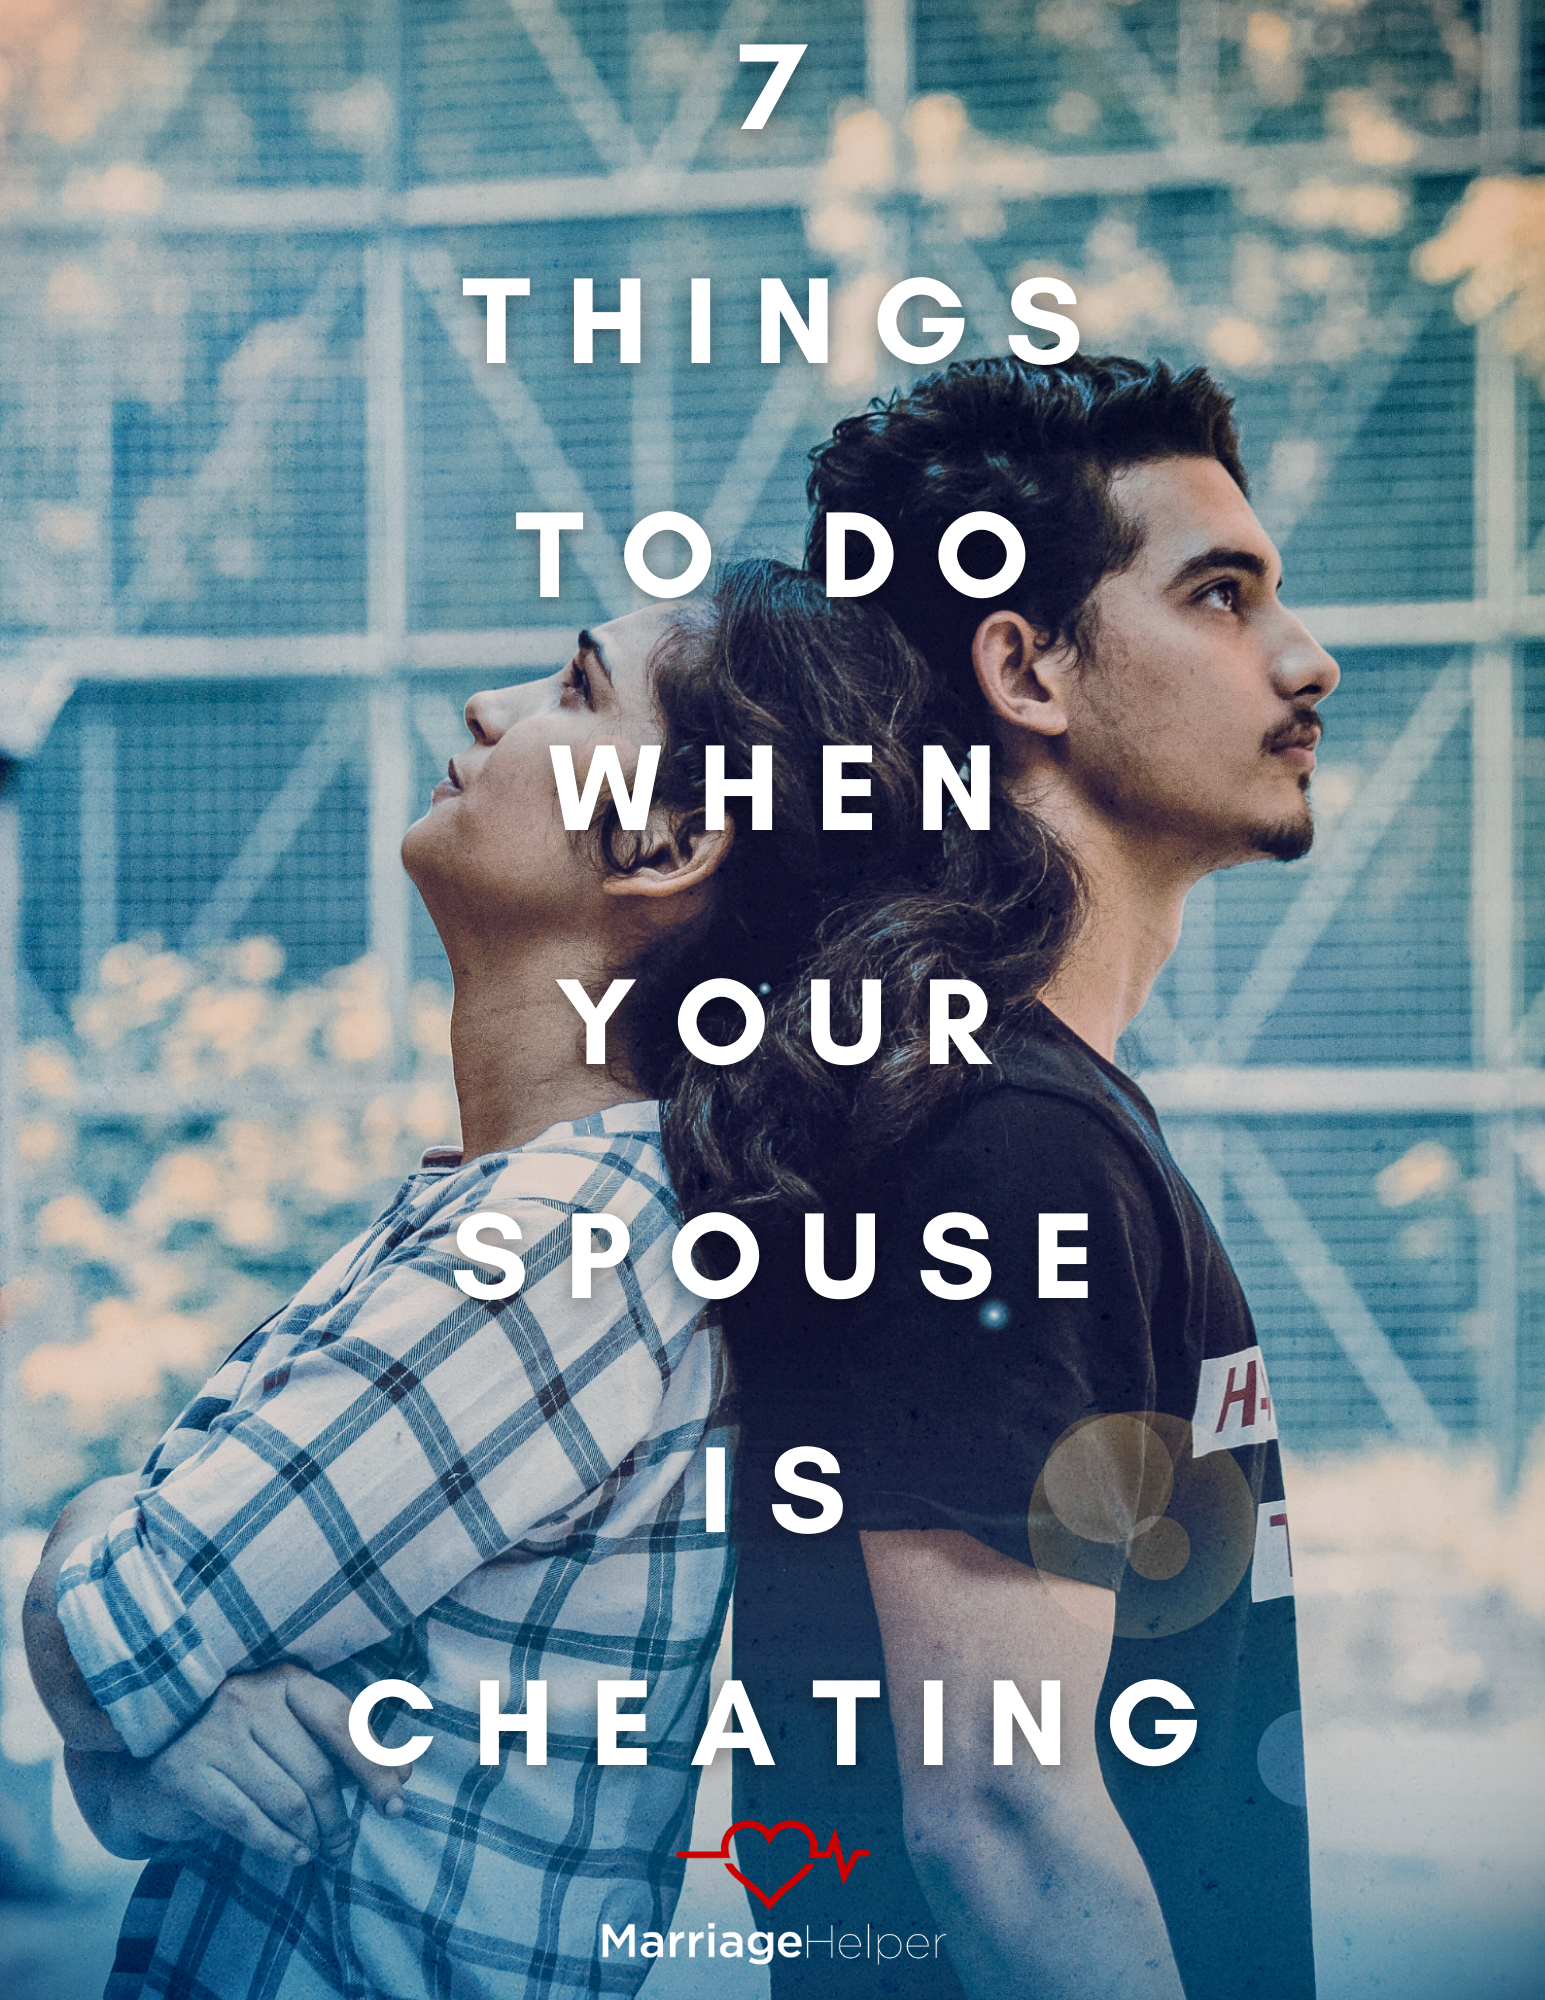 7 things to do when your spouse is cheating eBook revised-22